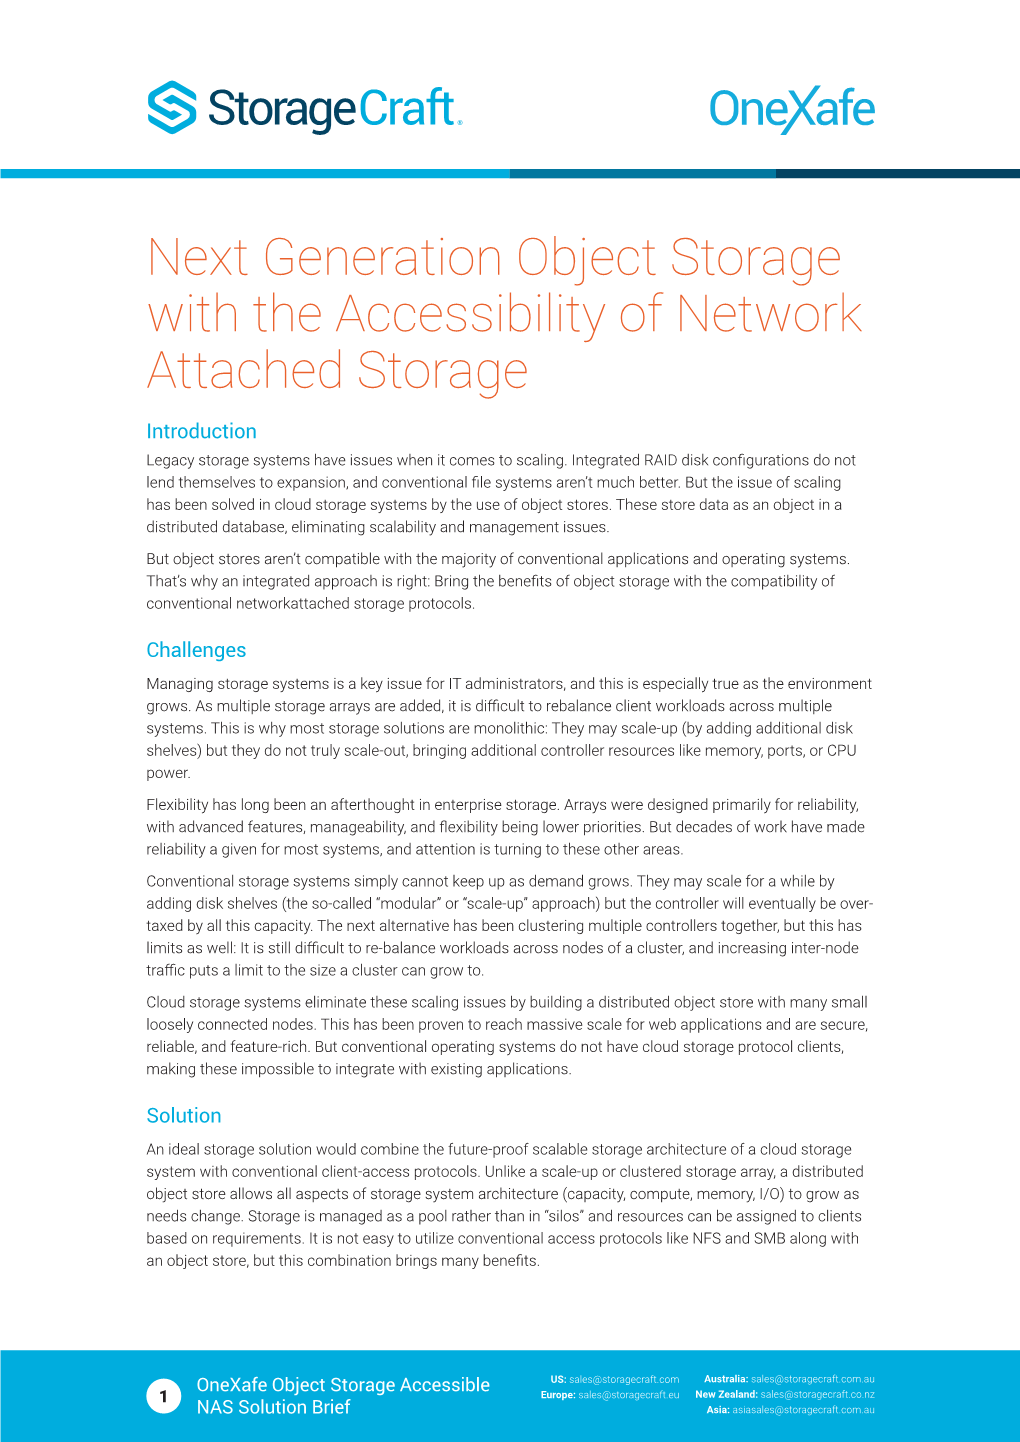 Next Generation Object Storage with the Accessibility of Network Attached Storage